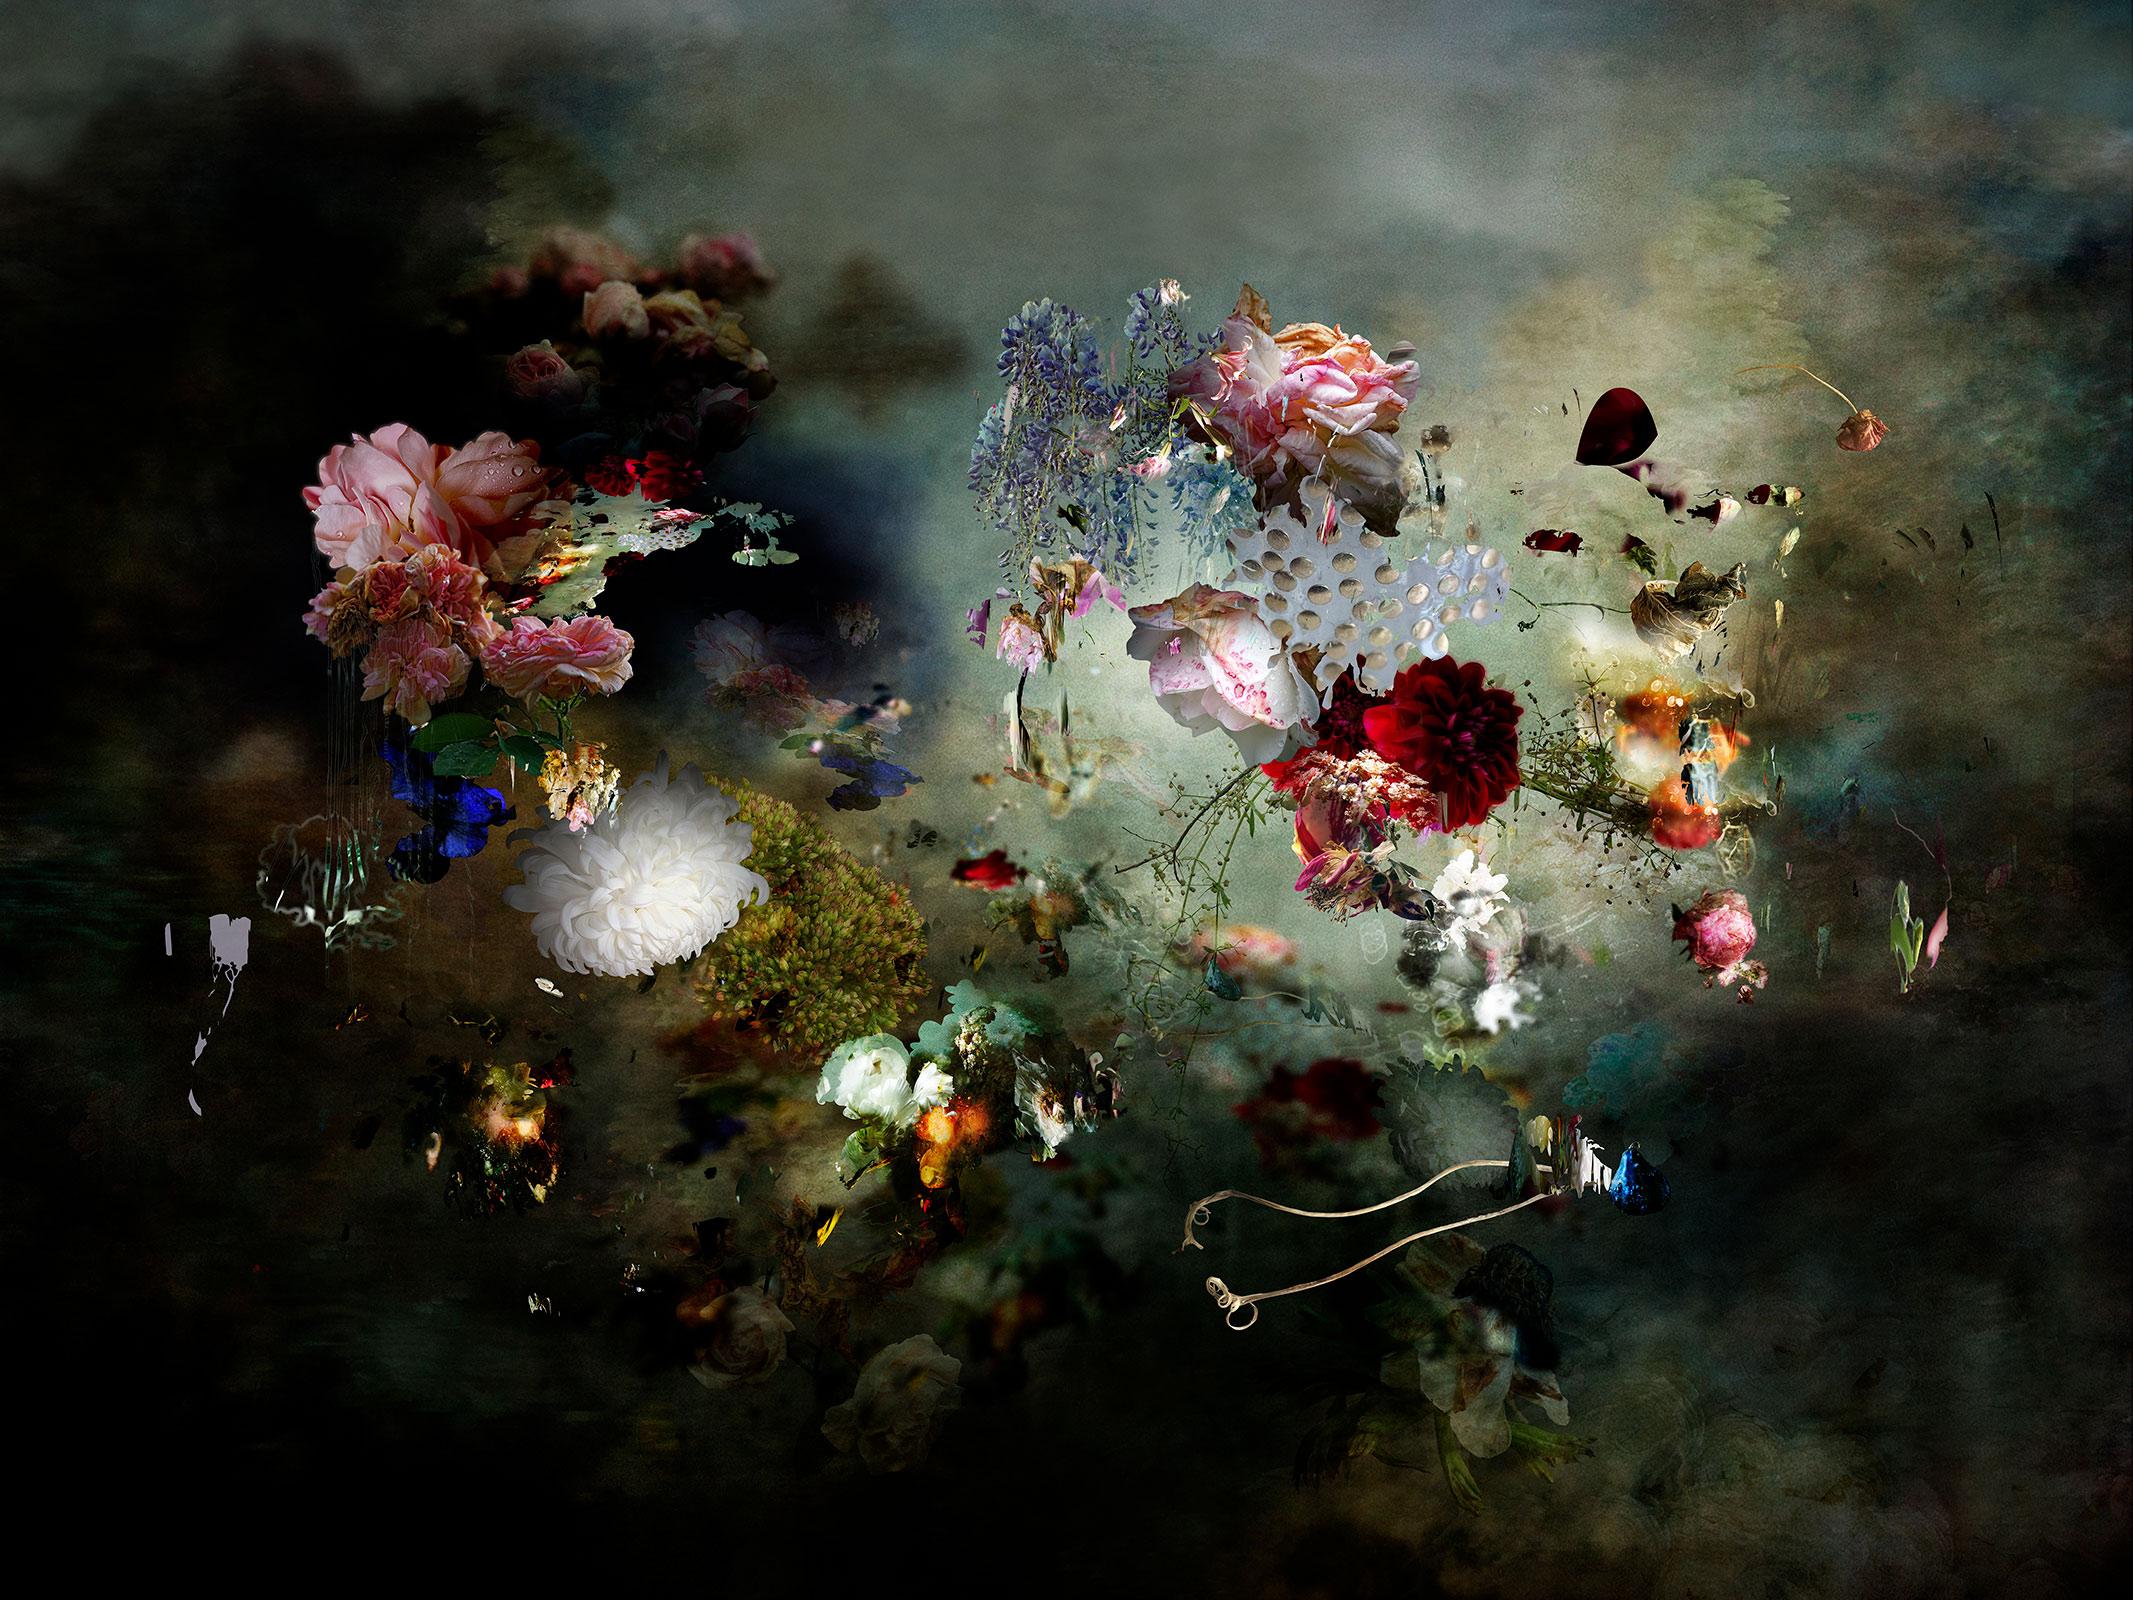 Isabelle Menin Still-Life Photograph - ALJ #3 - abstract floral still life contemporary landscape color photography